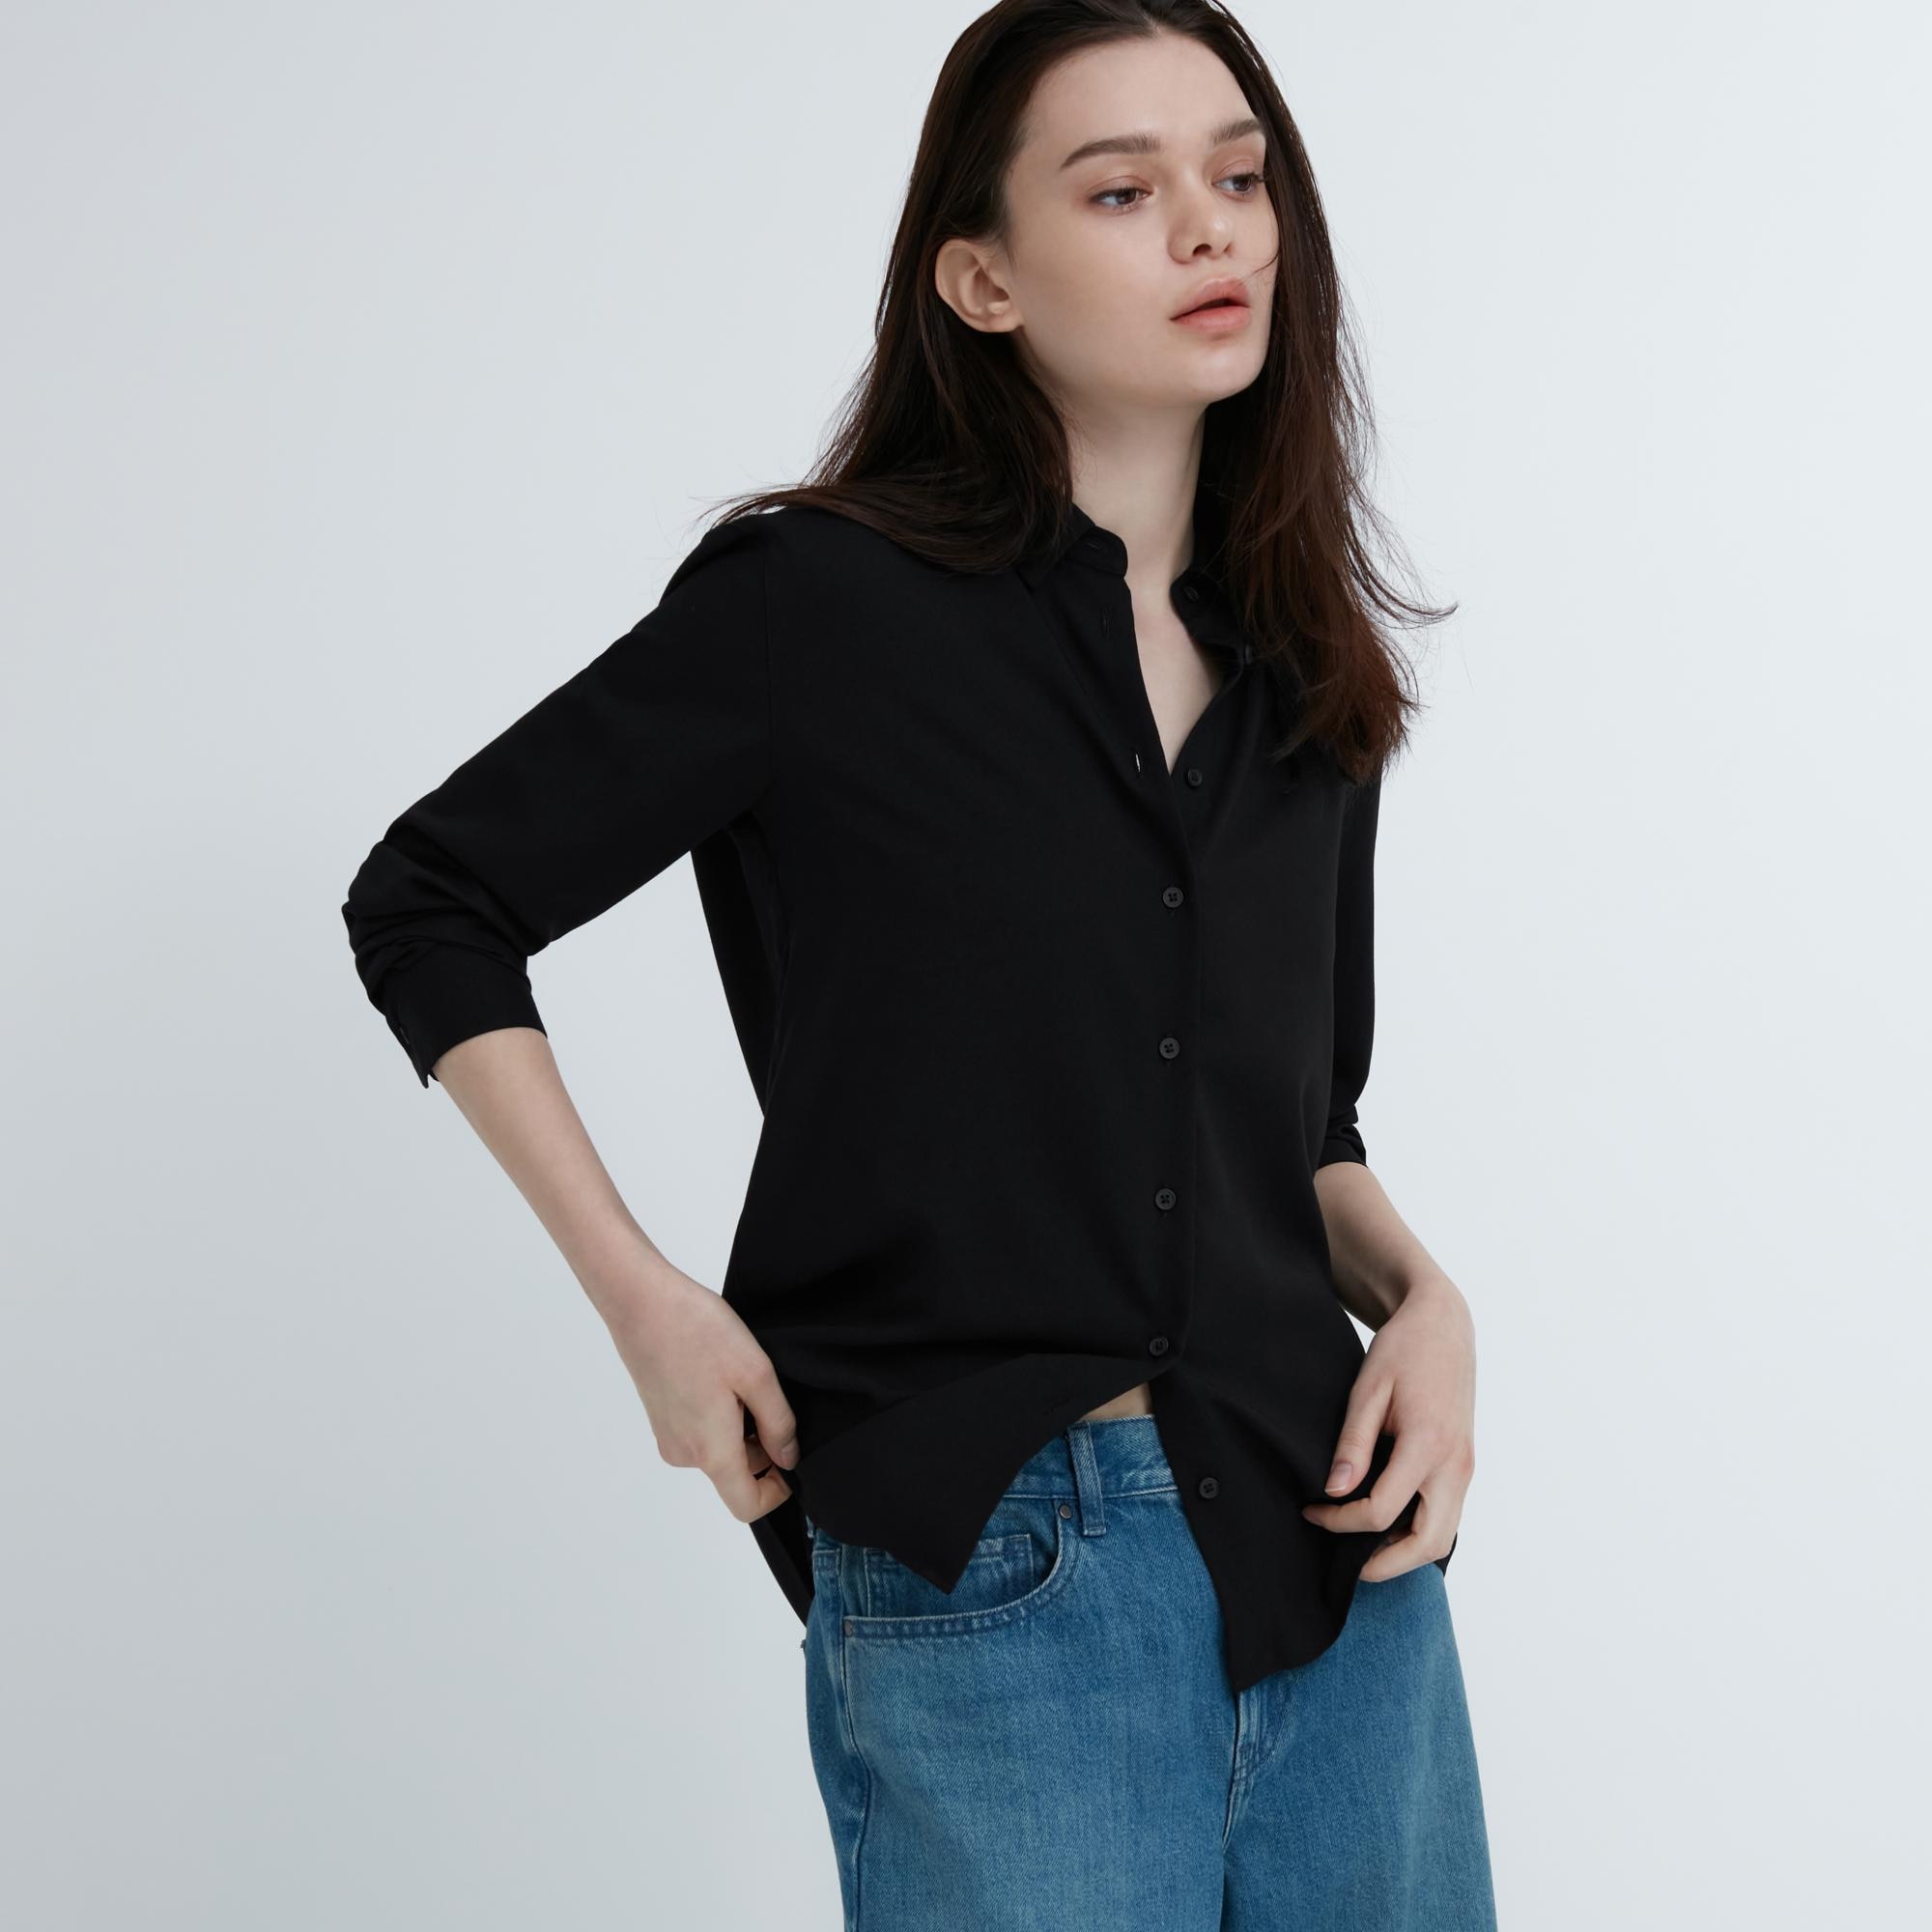 Check styling ideas for「Easy Cargo Pants、Rayon Long Sleeve Blouse」